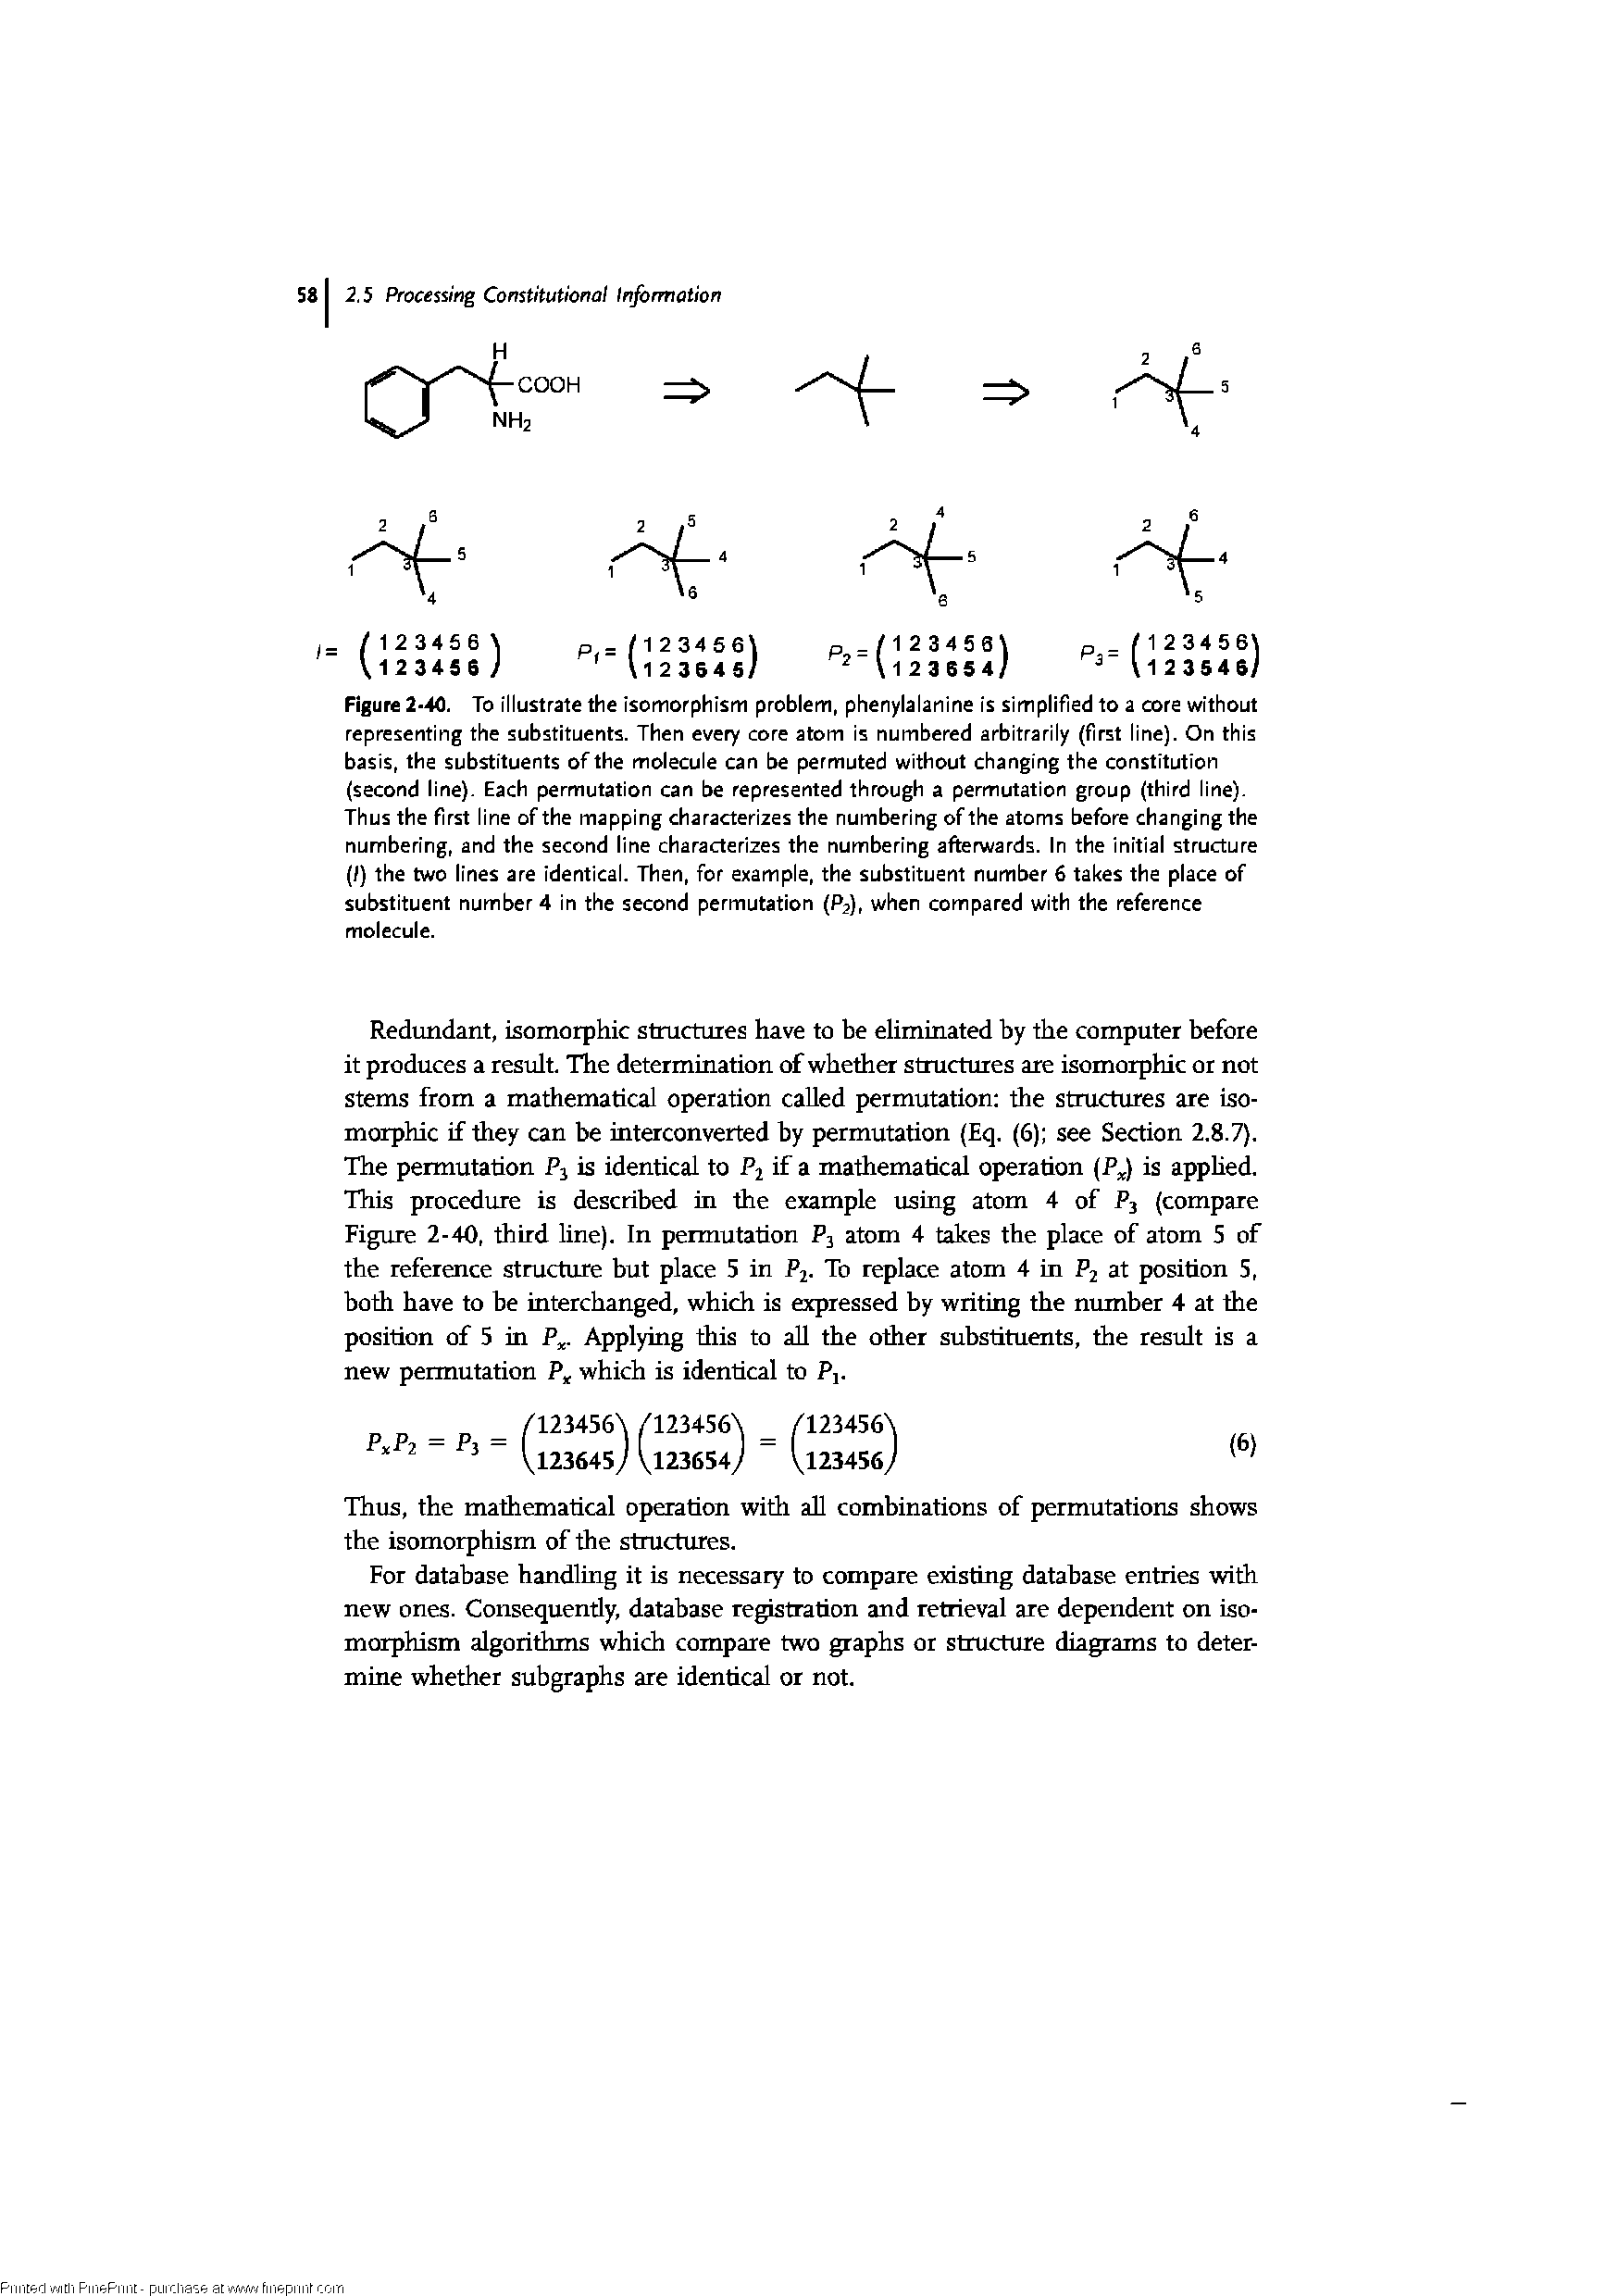 Figure 2 40. To illustrate the isomorphism problem, phenylalanine is simplified to a core without representing the substituents. Then every core atom is numbered arbitrarily (first line). On this basis, the substituents of the molecule can be permuted without changing the constitution (second line). Each permutation can be represented through a permutation group (third line). Thus the first line of the mapping characterizes the numbering of the atoms before changing the numbering, and the second line characterizes the numbering afterwards. In the initial structure (/) the two lines are identical. Then, for example, the substituent number 6 takes the place of substituent number 4 in the second permutation (P2), when compared with the reference molecule.